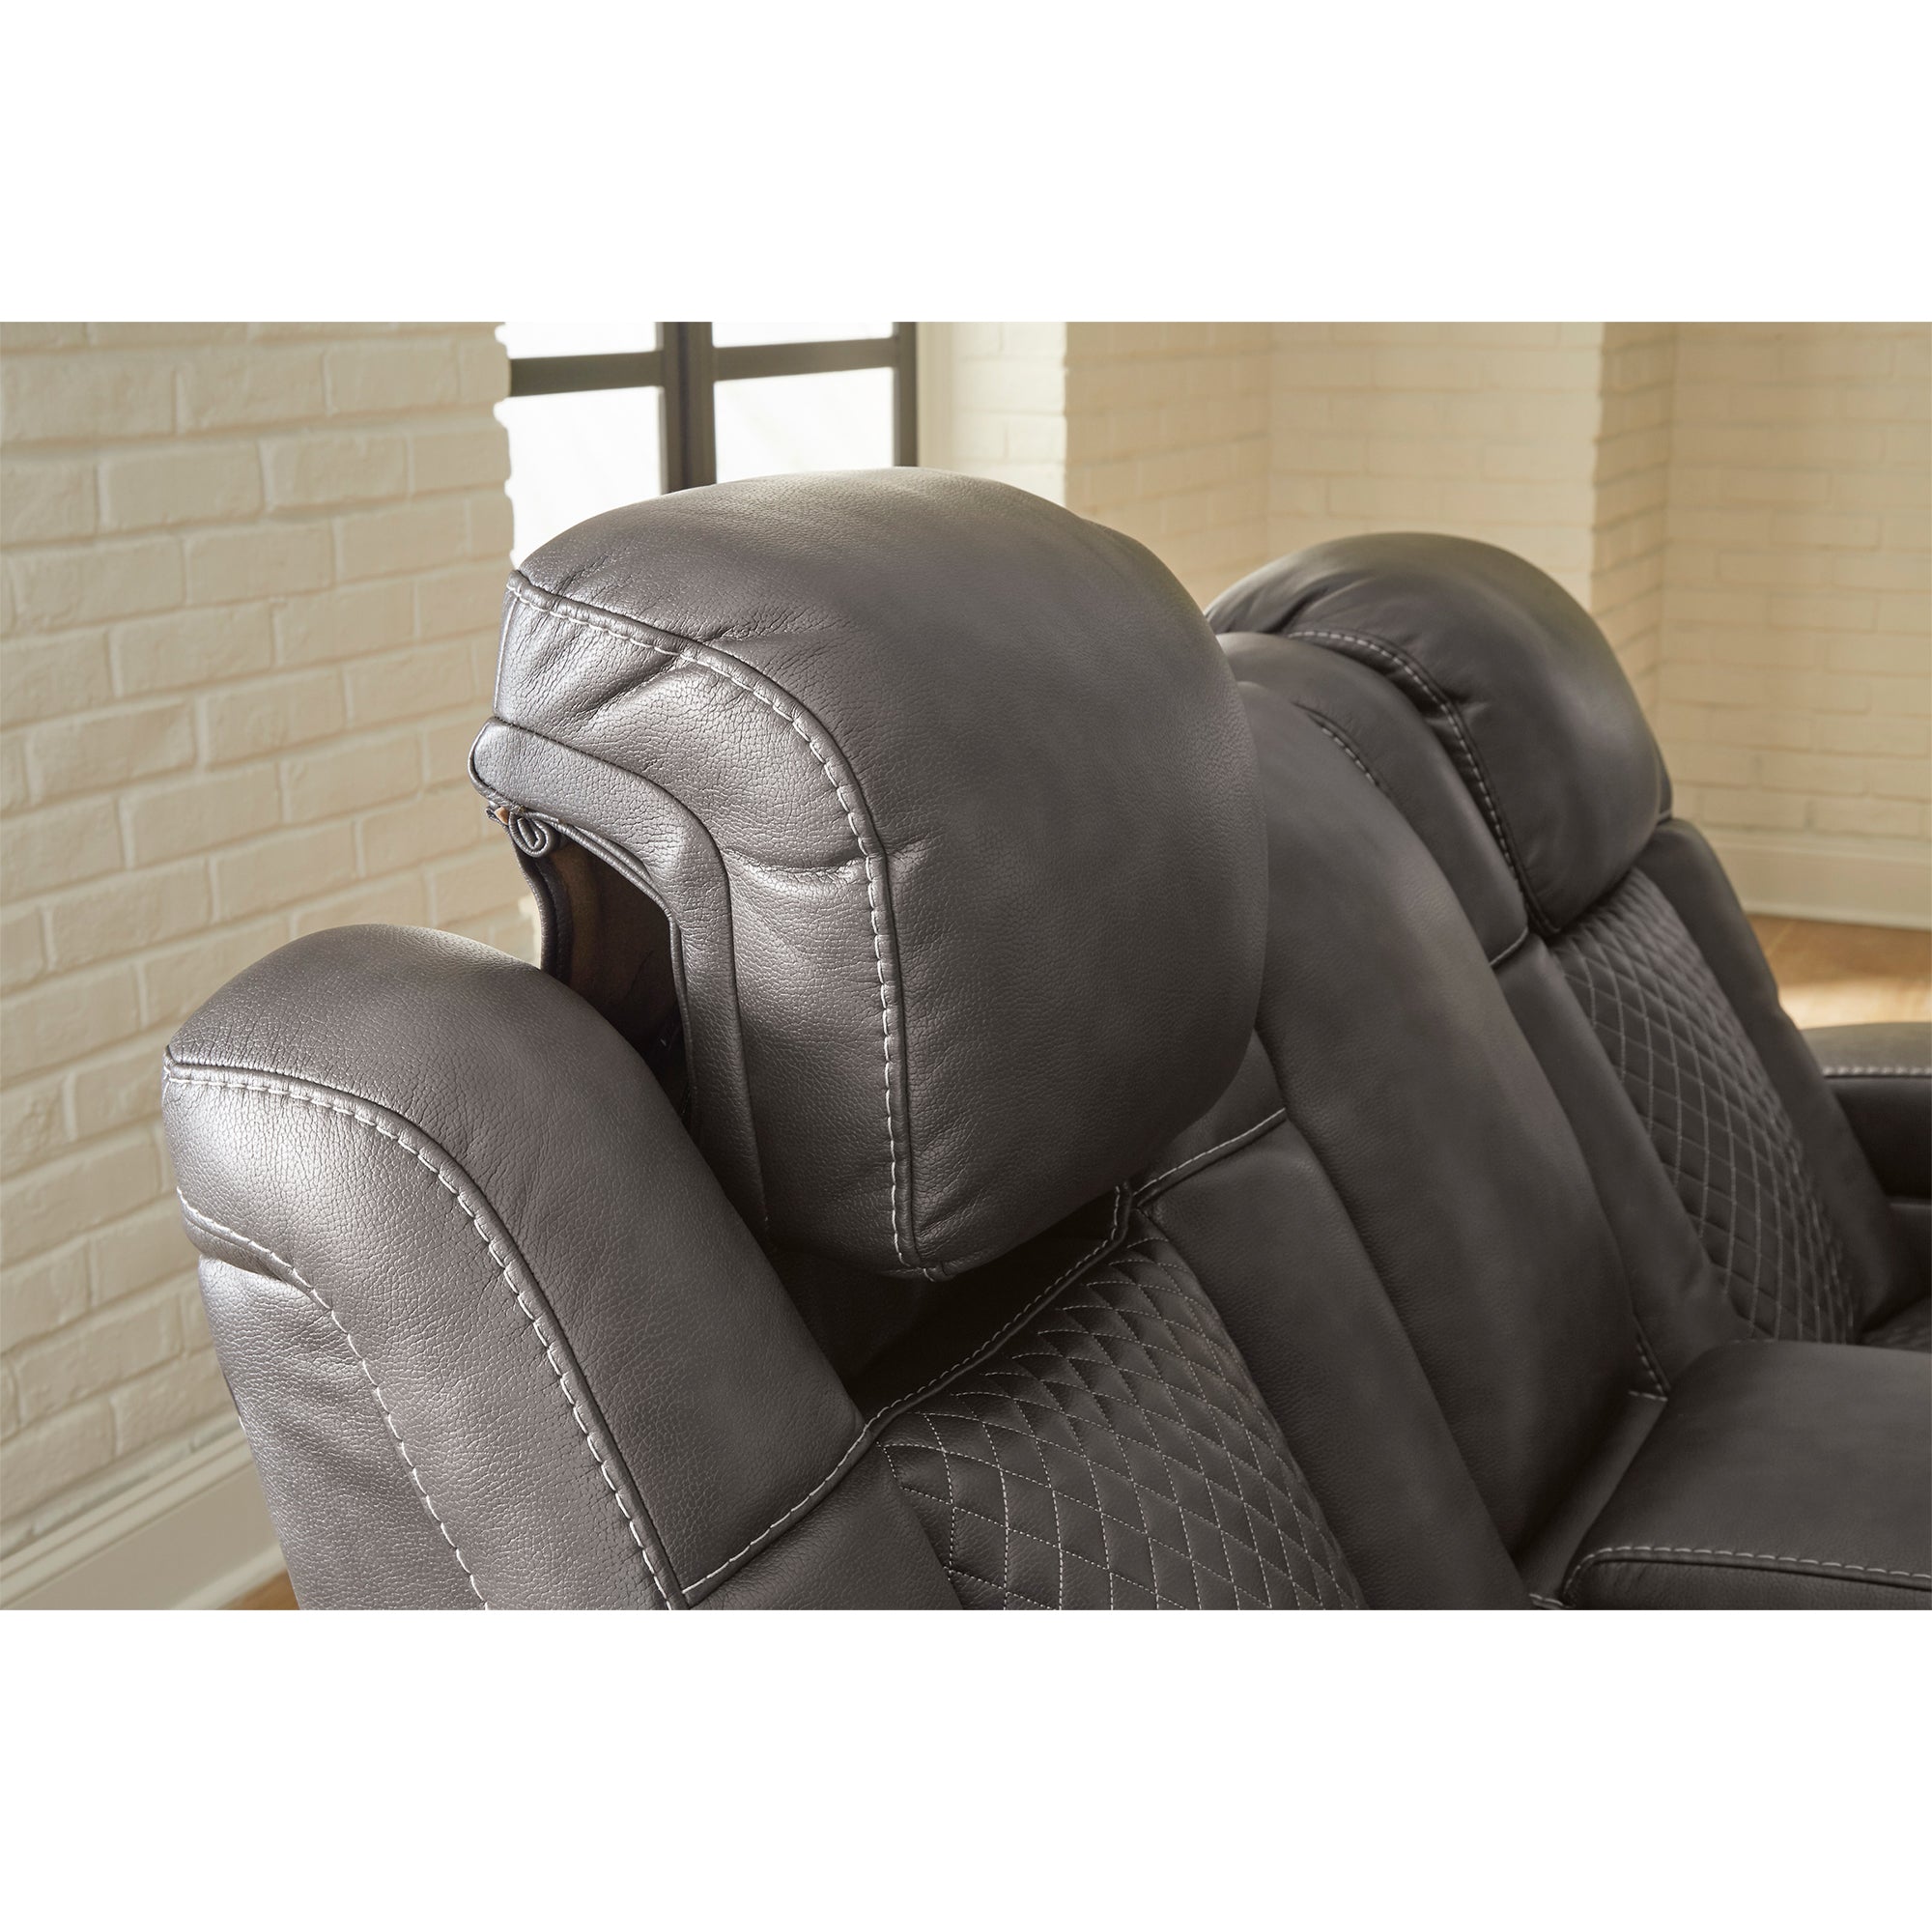 Fyne-Dyme Dual Power Reclining Loveseat with Console